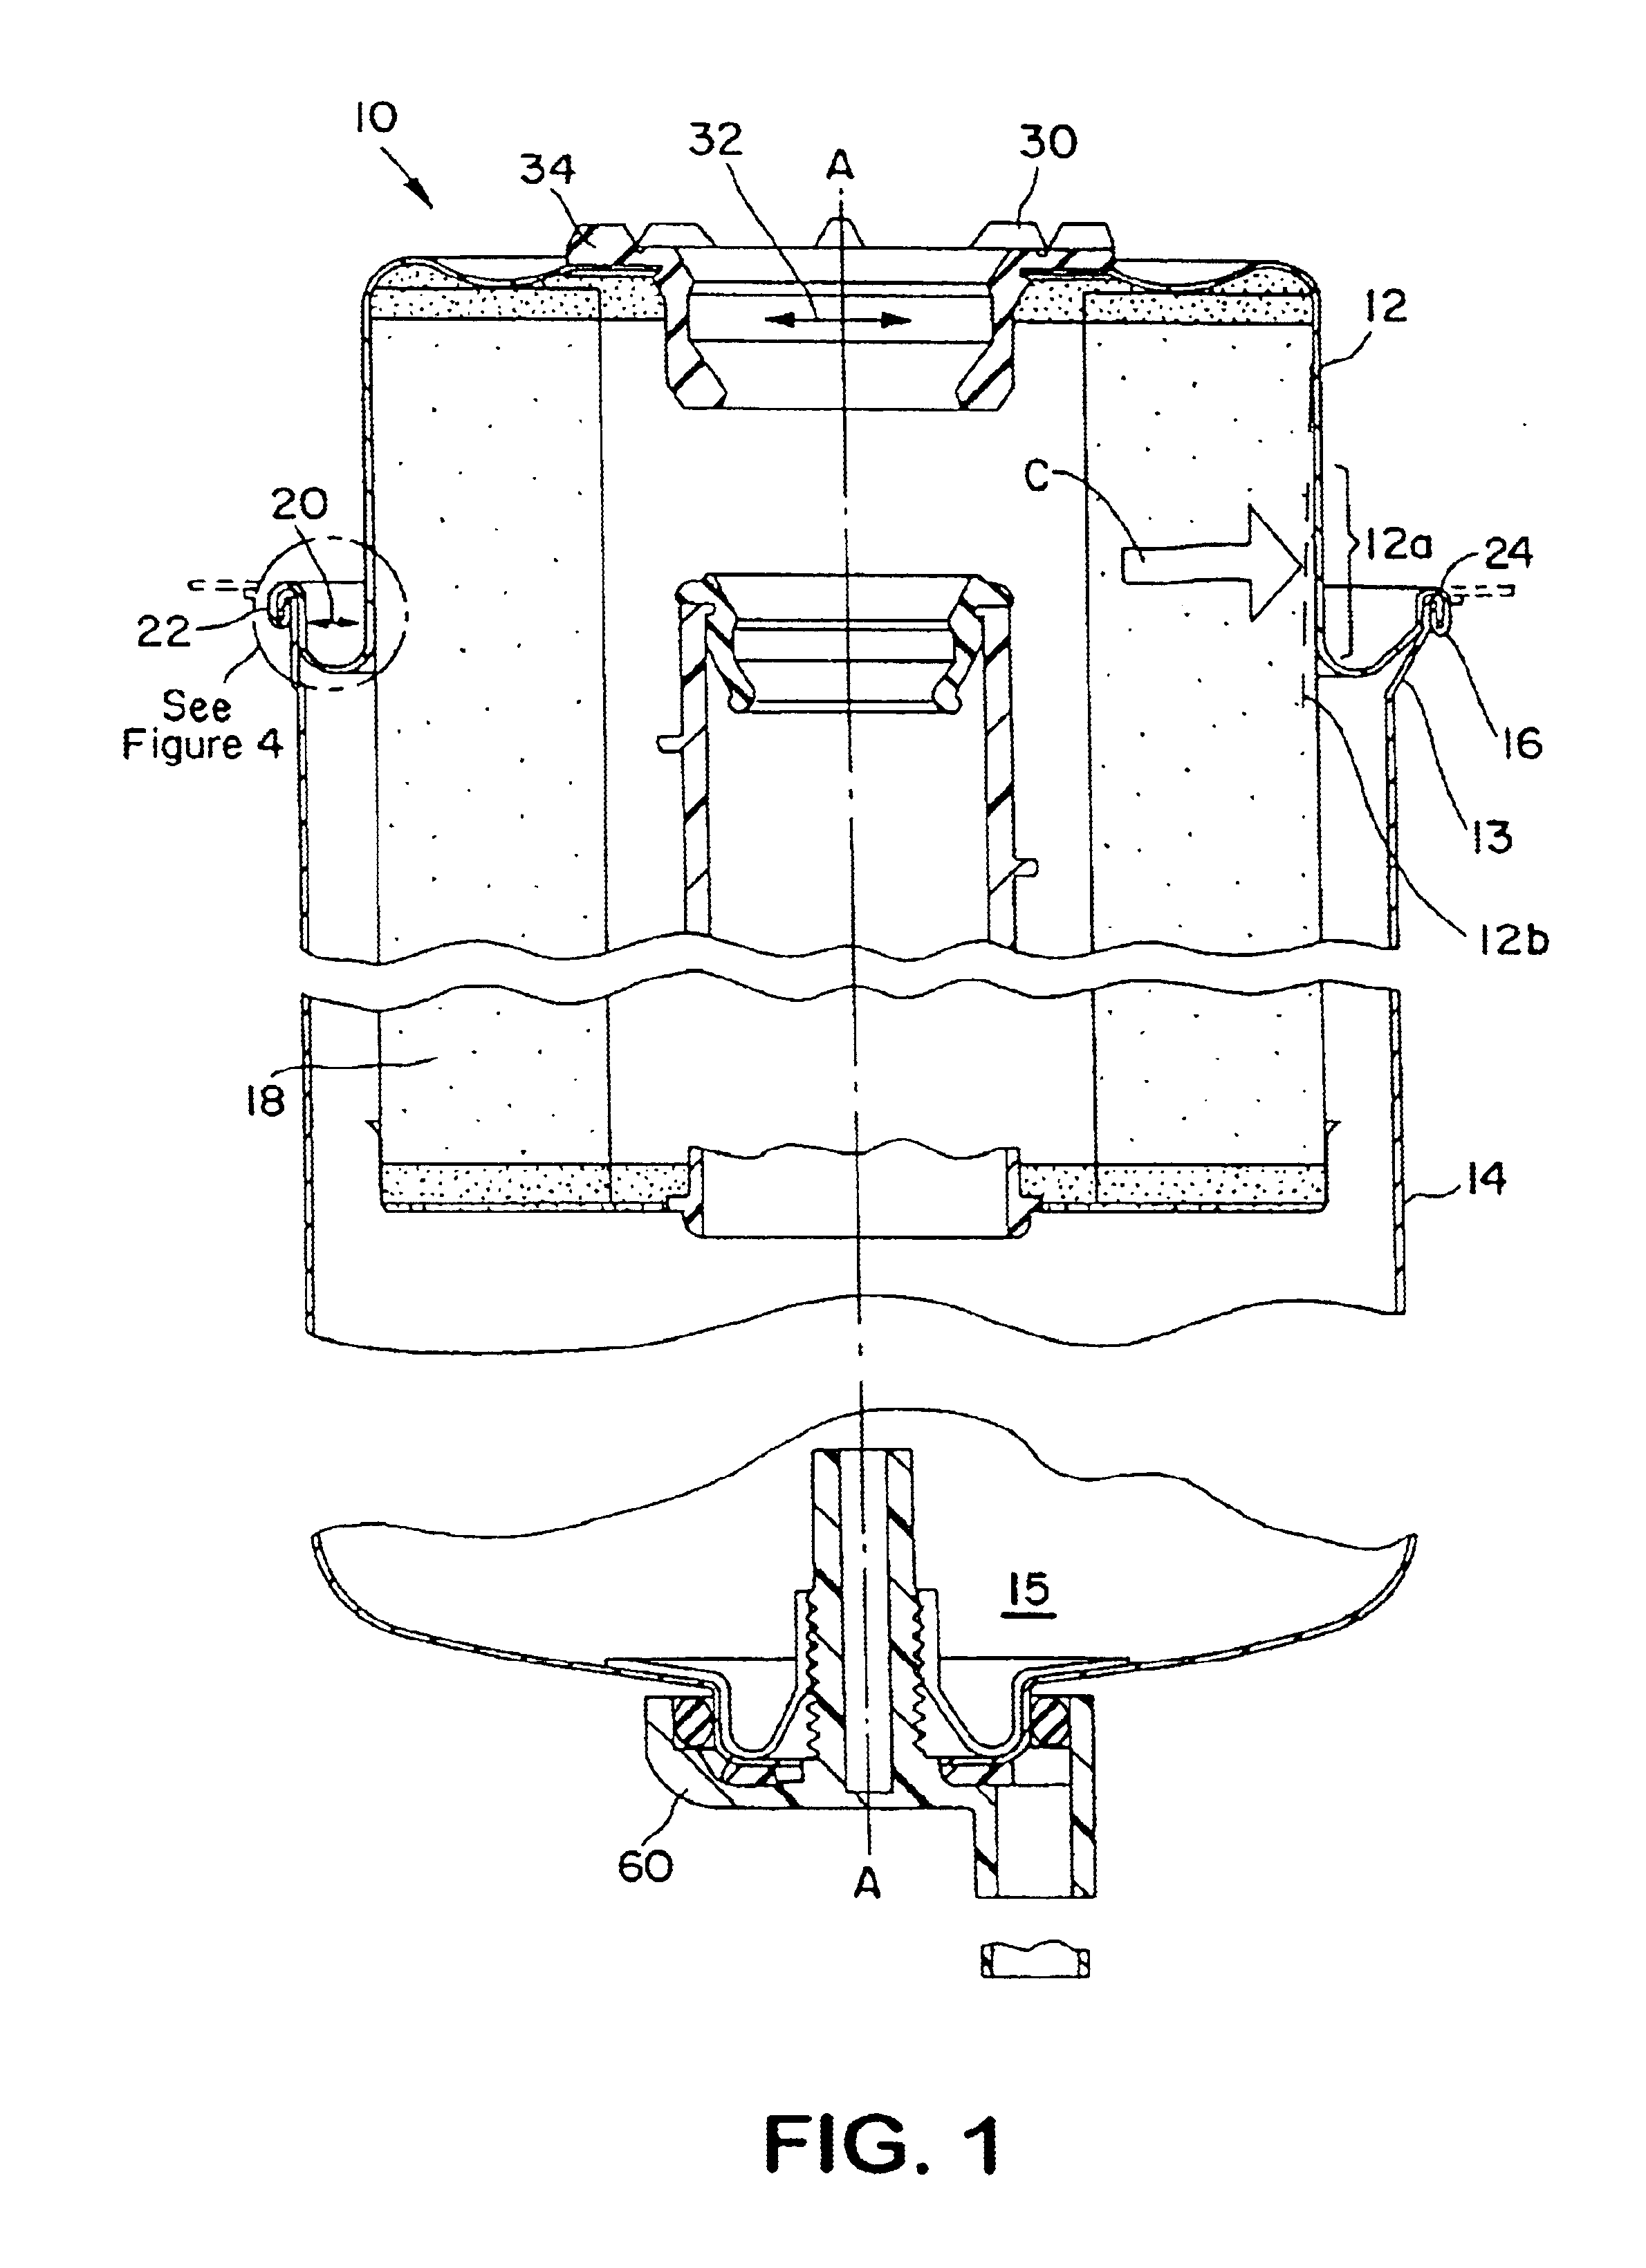 Base receptacle with fixed retainer for filter cartridge incorporating a peripheral compatibility matrix